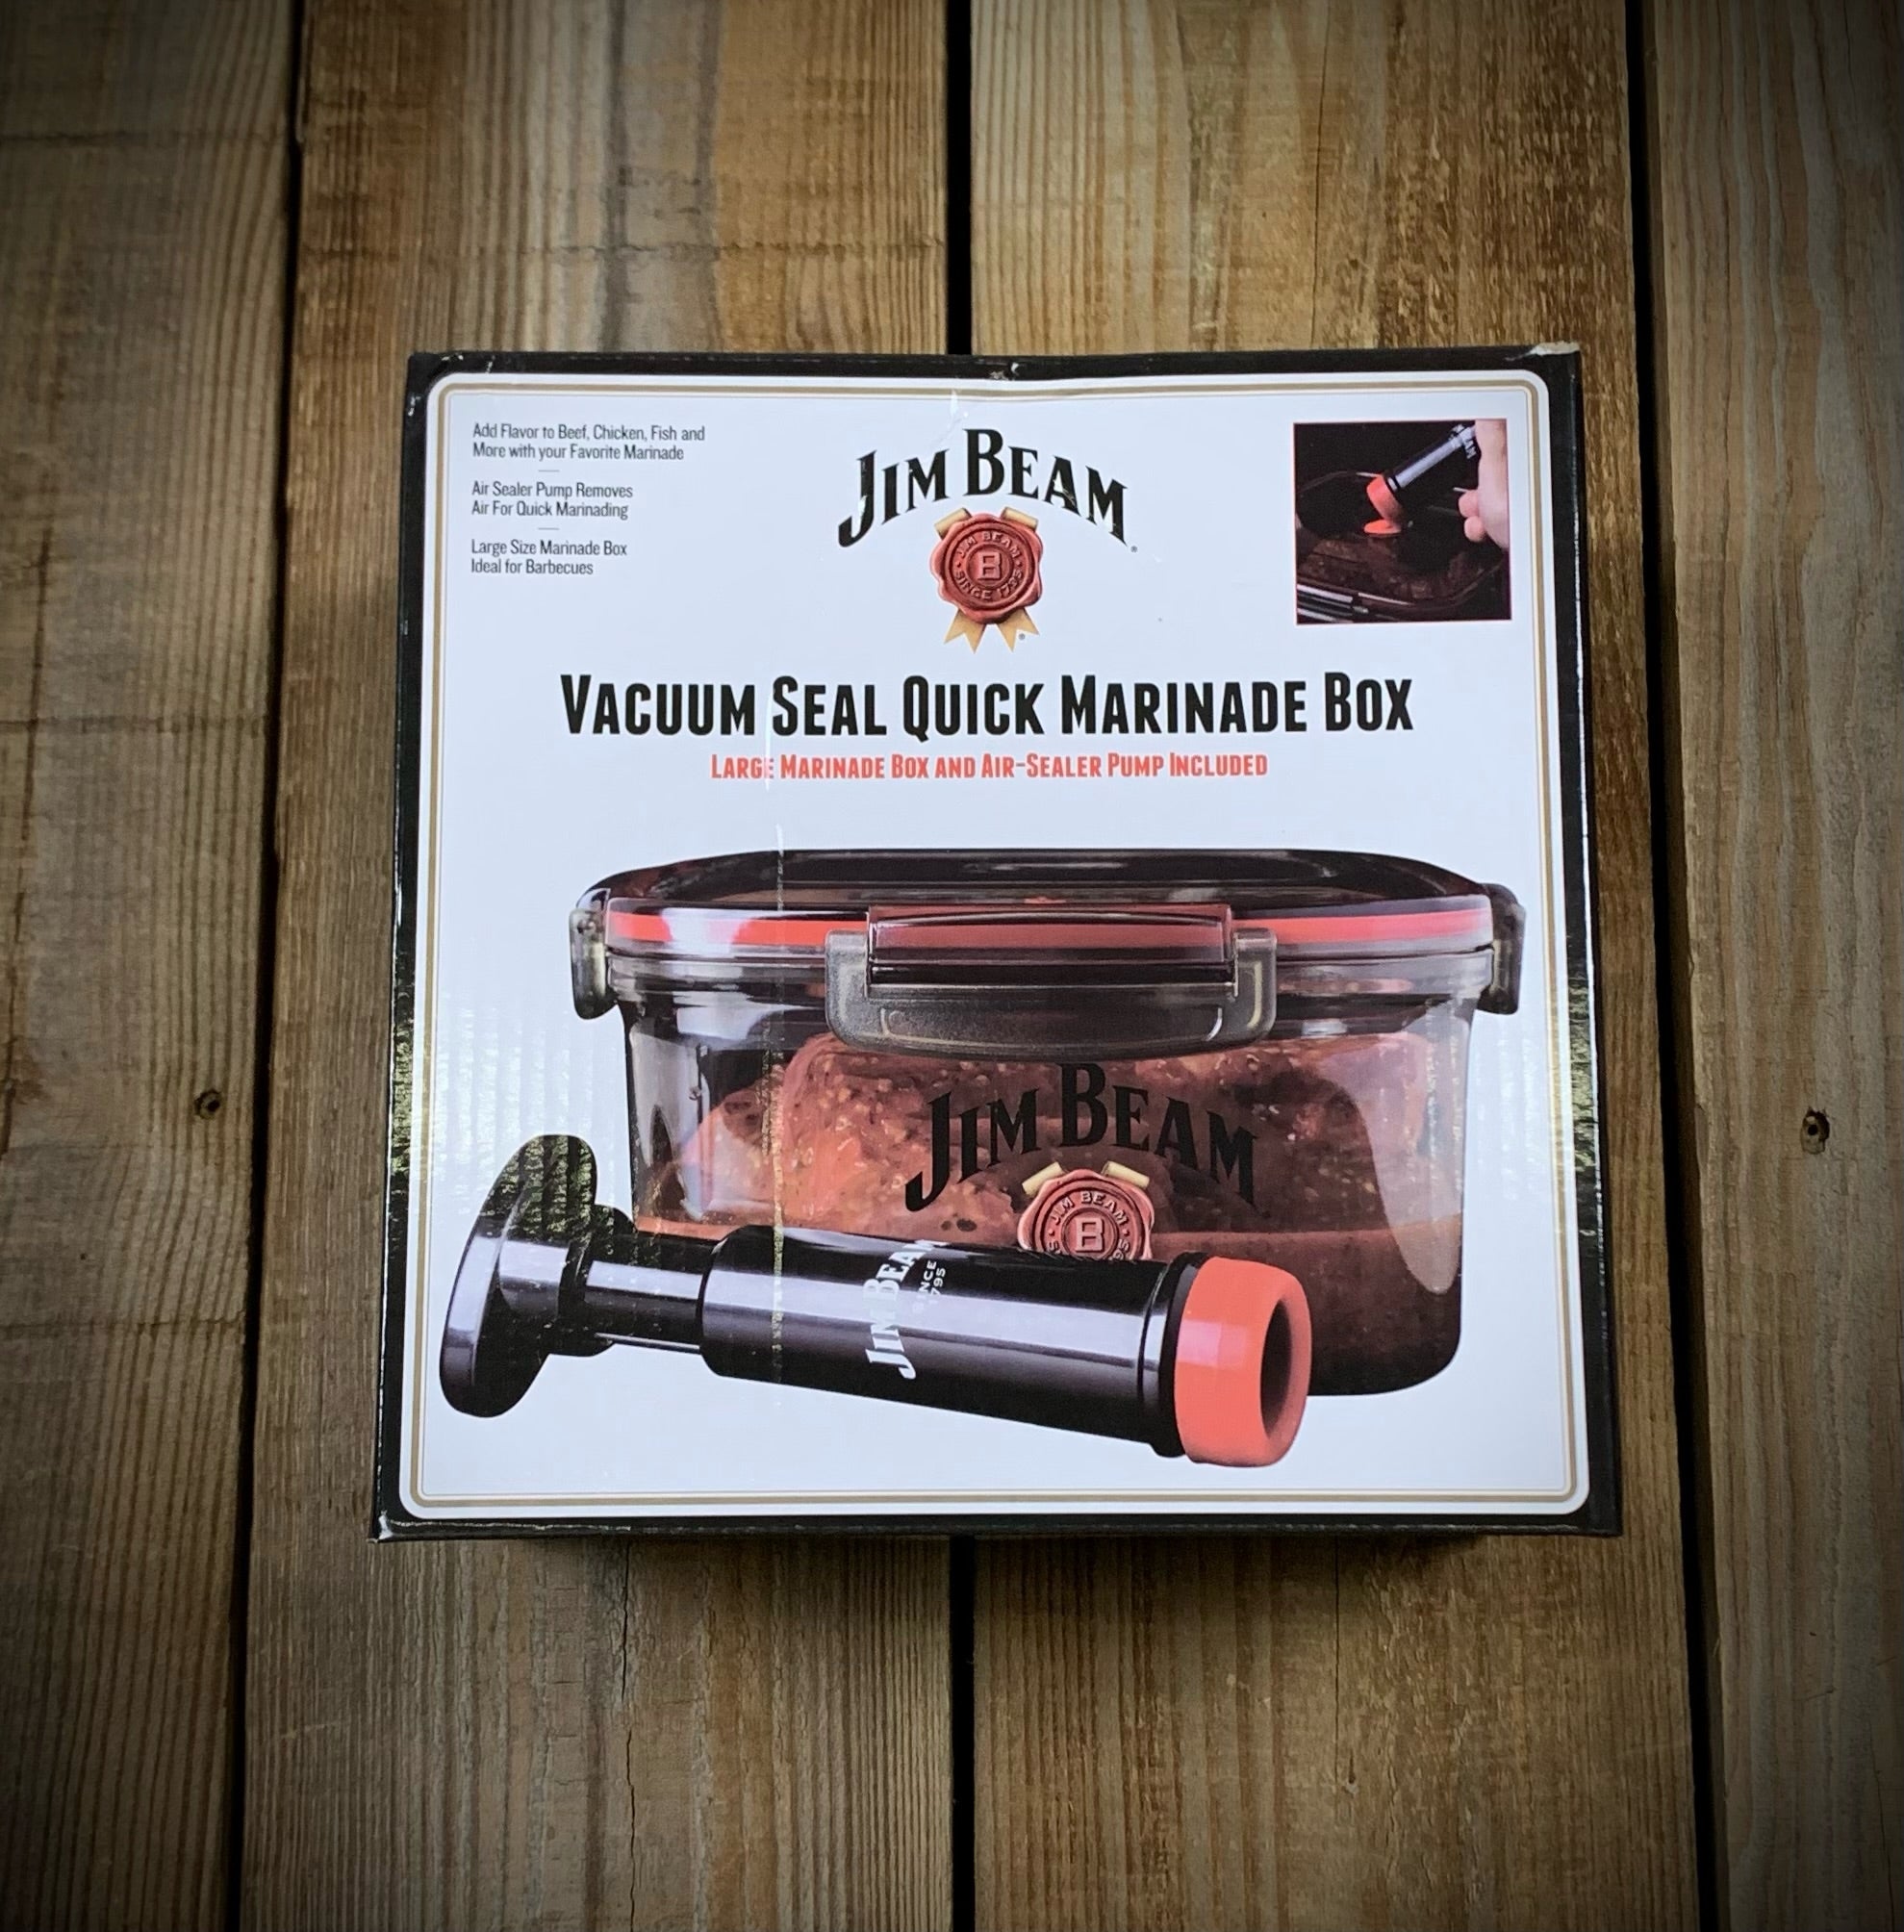  Jim Beam Vacuum Seal Marinade Box, Air Sealed Pump, Removes air  from the Marinade Box, Speedy Marination Process, Barbecue and Grilling  Marinator, Perfect Marination of Beef, Chicken and Fish : Home